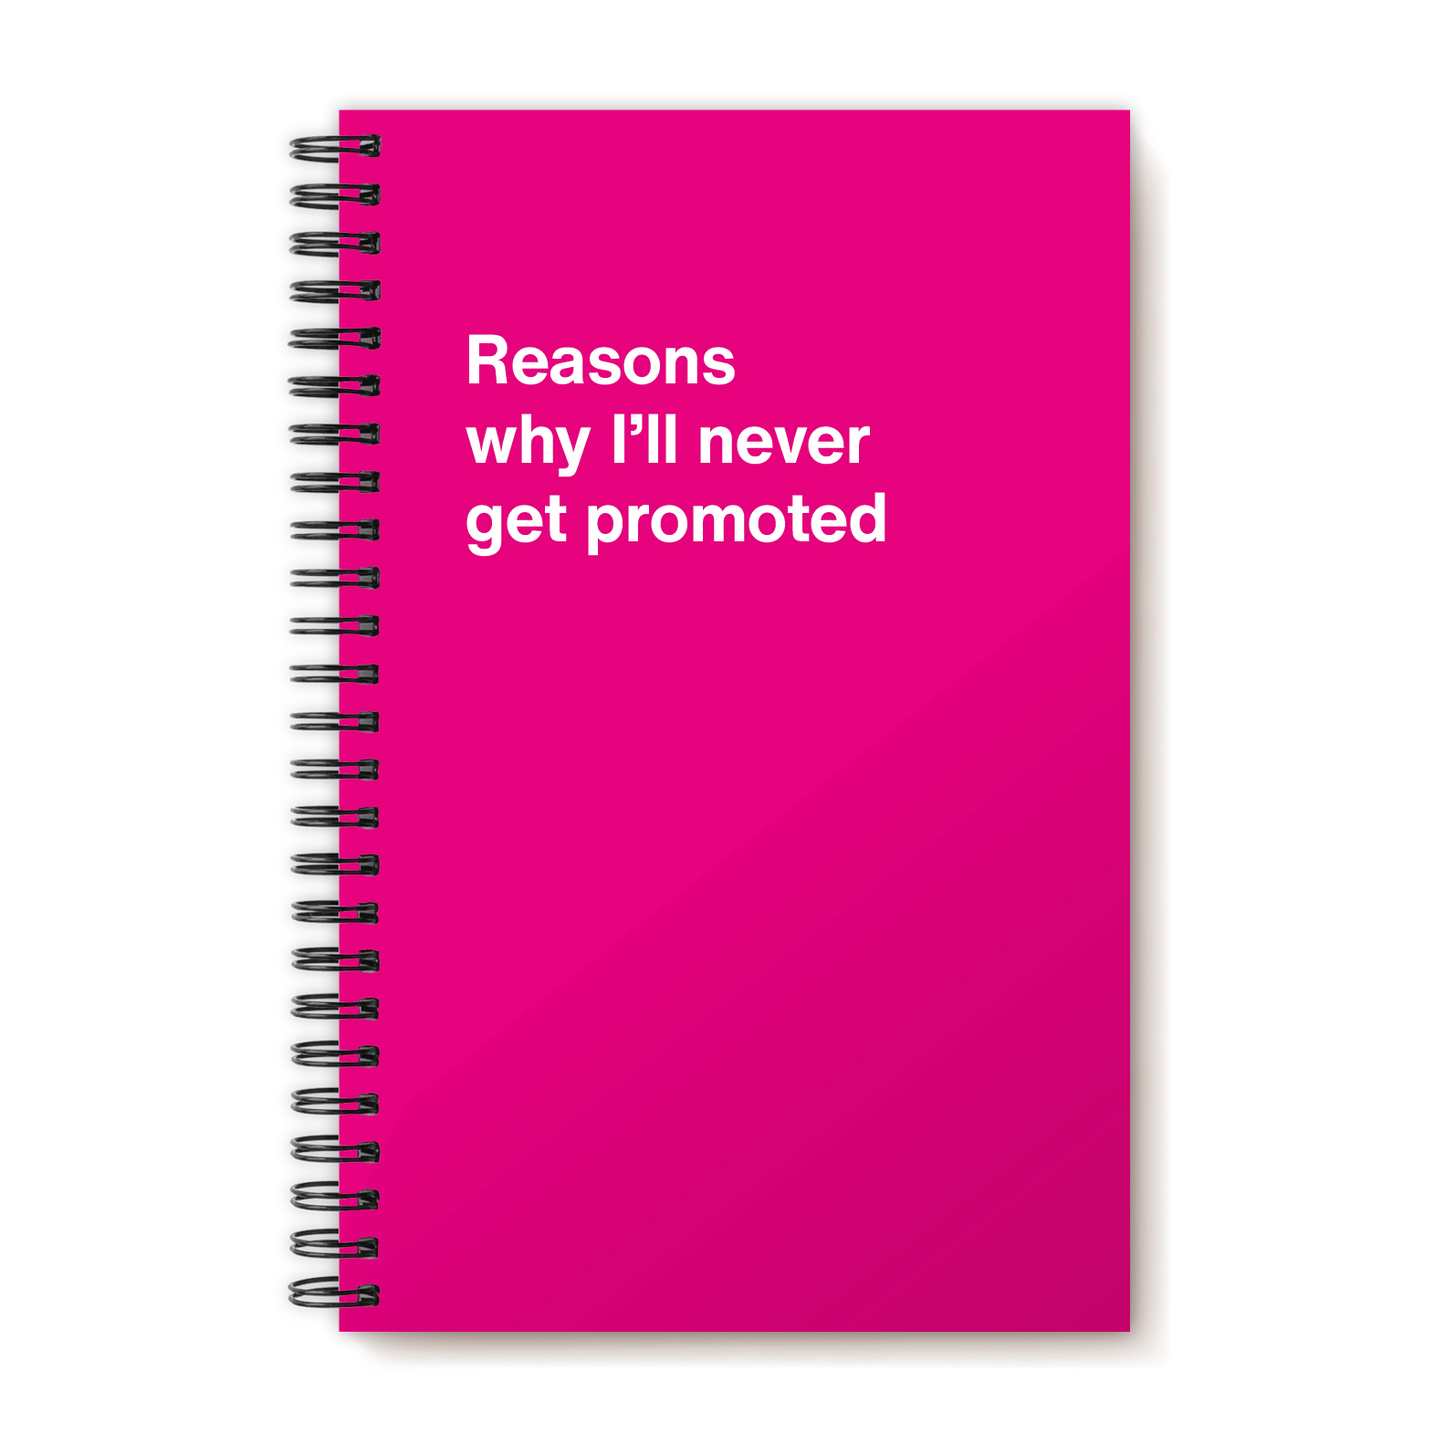 Reasons why I’ll never get promoted | WTF Notebooks